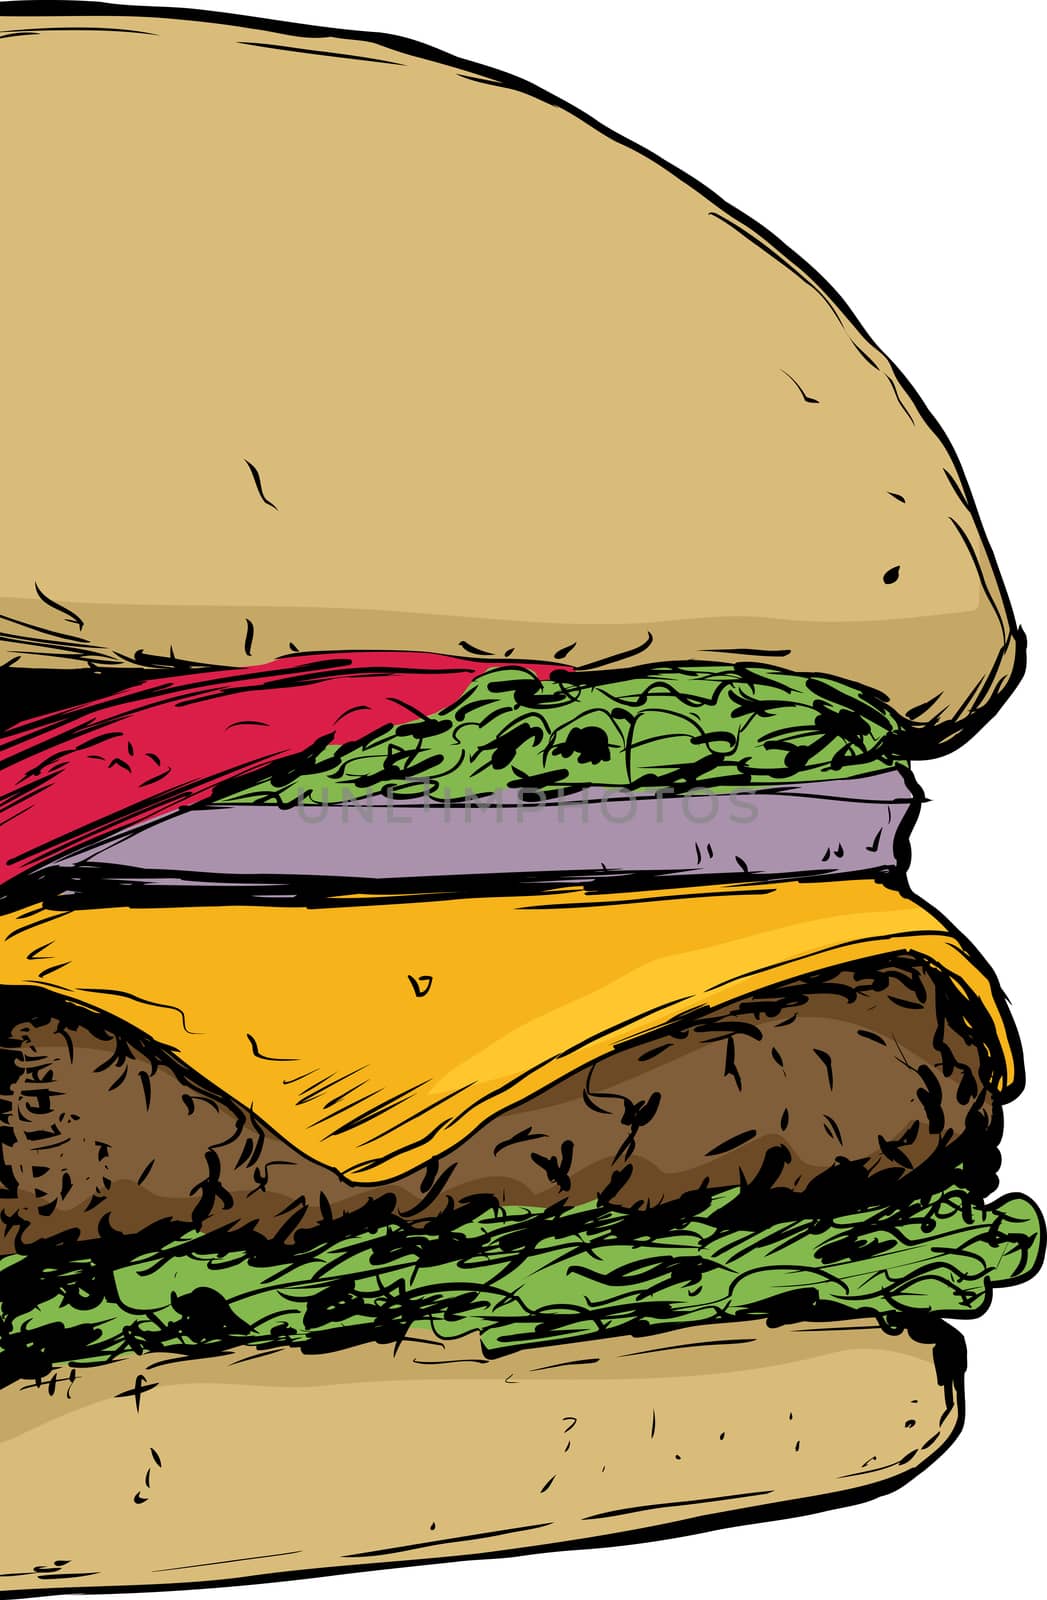 Cropped close up view on delicious cheeseburger with tomato, lettuce and onion on bun